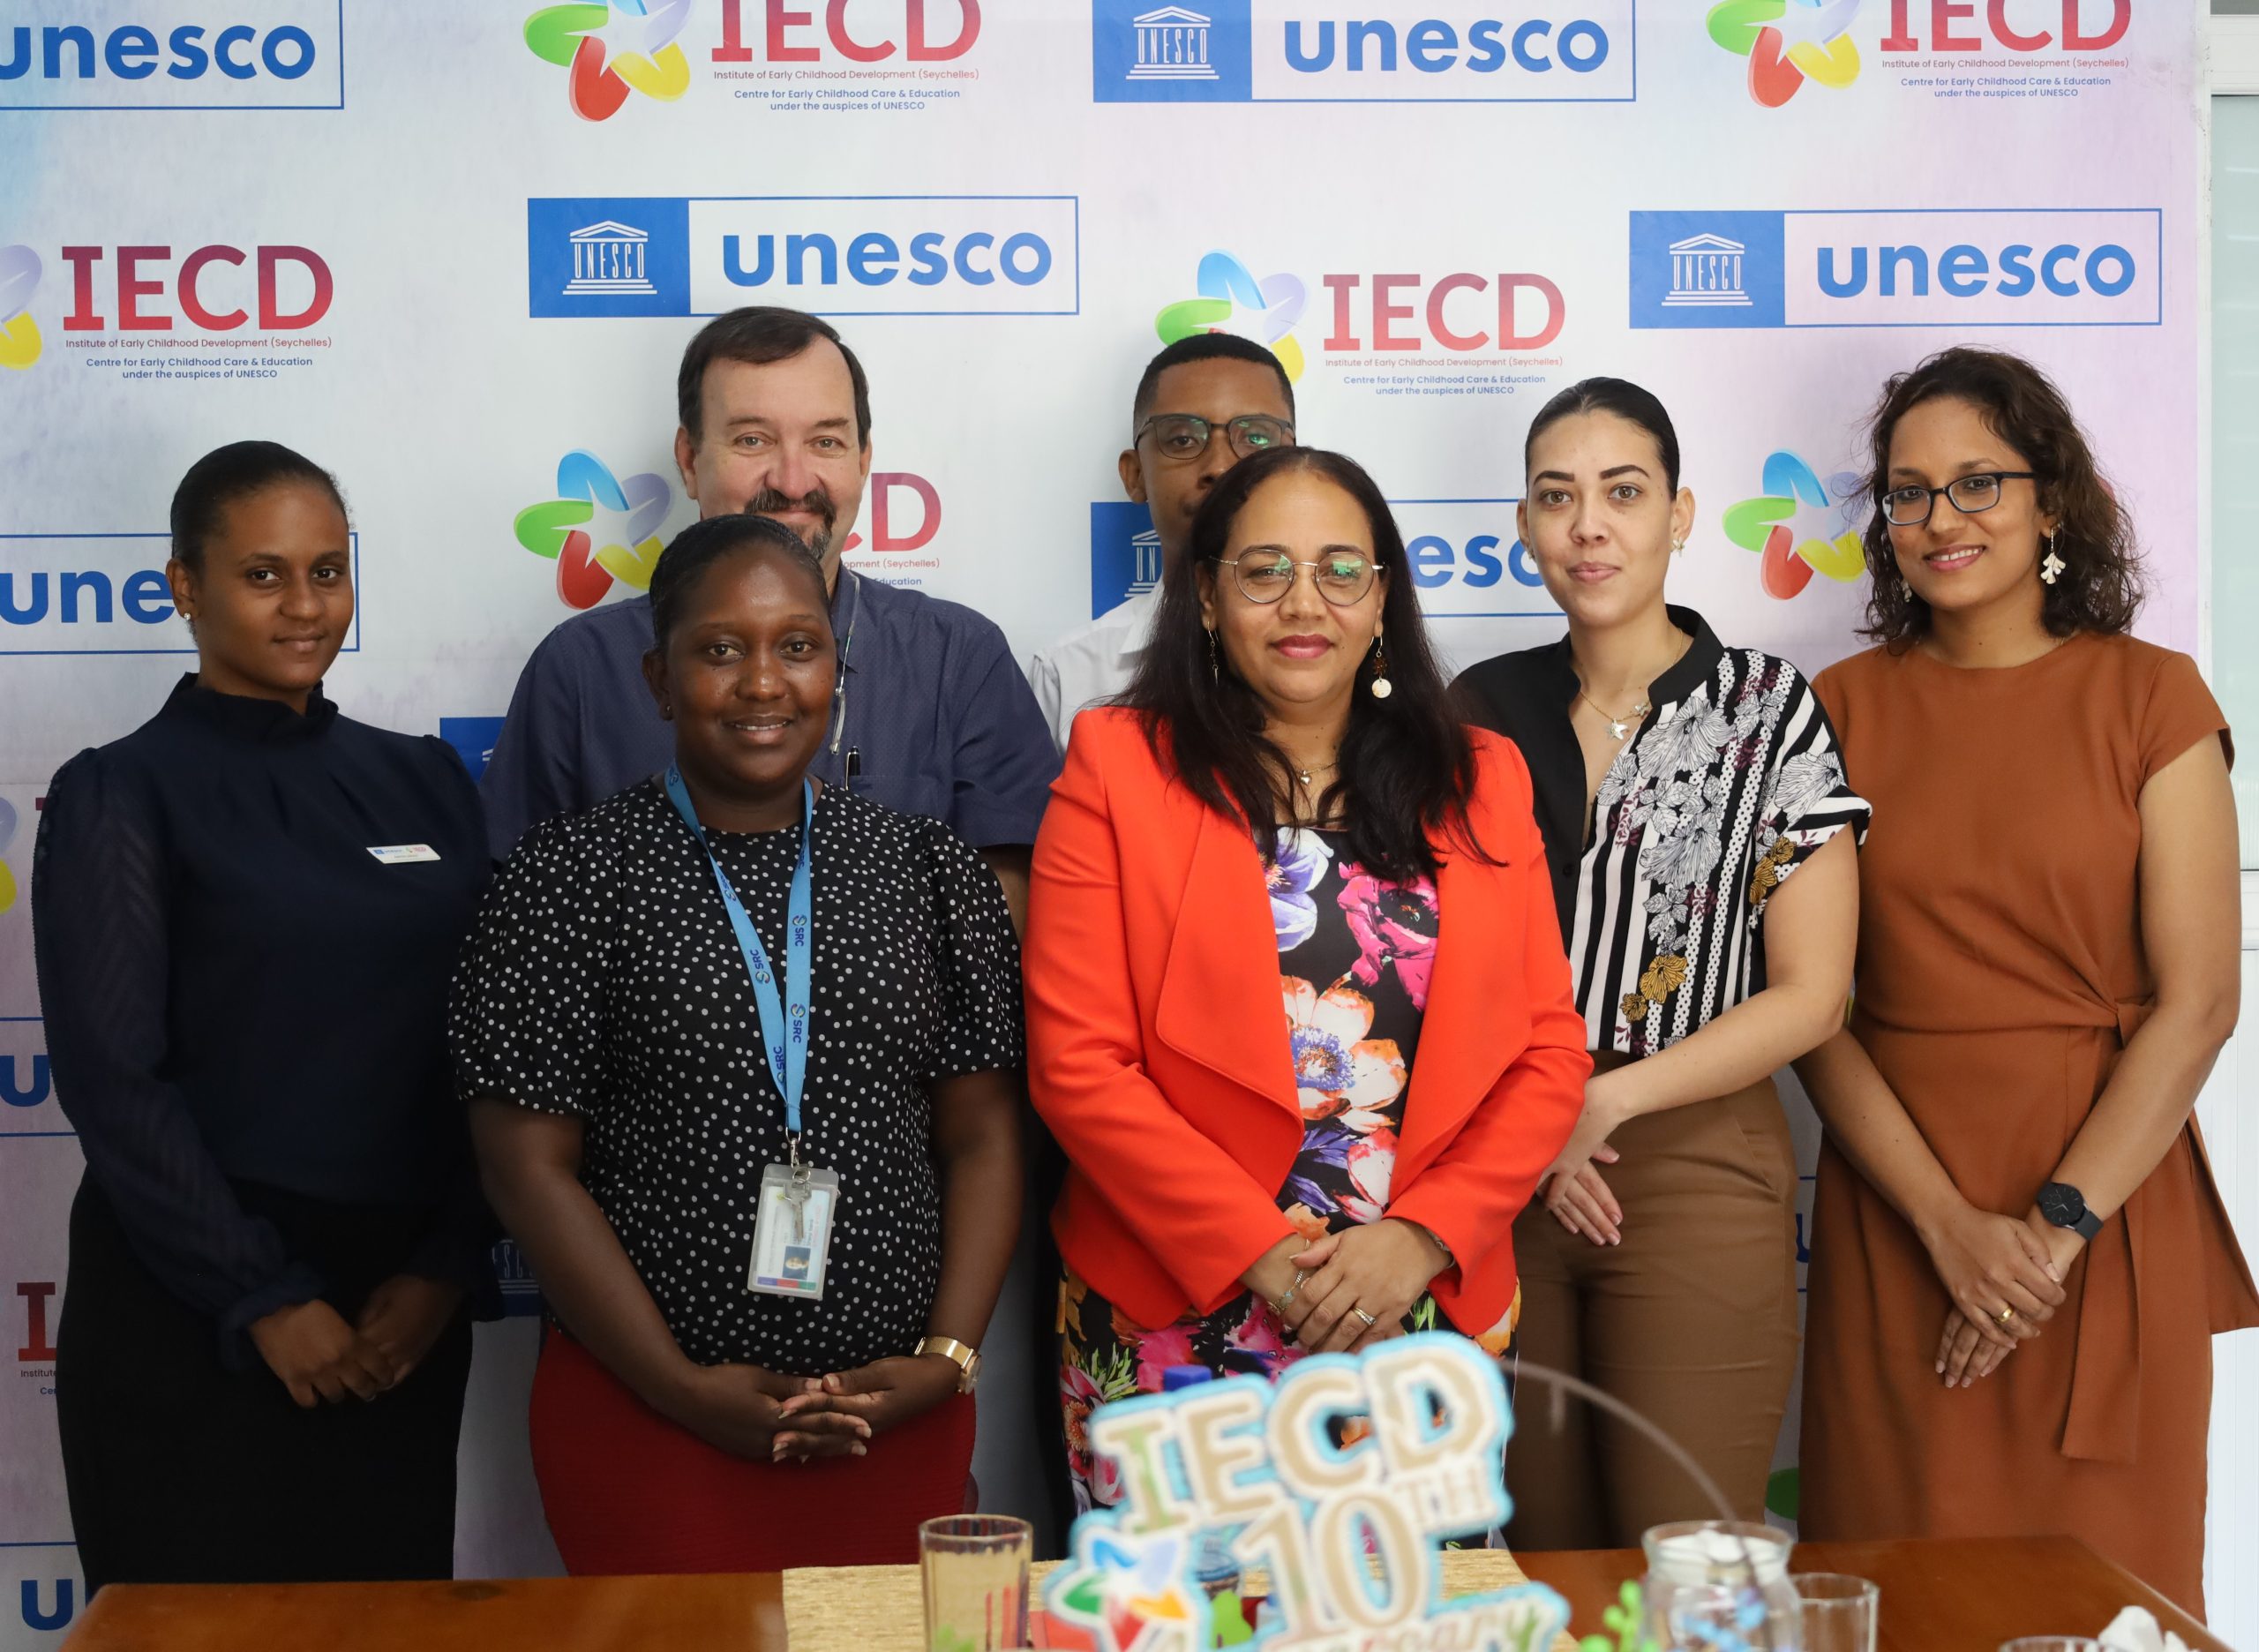 REPRESENTATIVE OF THE INSTITUTE OF EARLY CHILDHOOD DEVELOPMENT (IECD) CATEGORY 2 INSTITUTE, SEYCHELLES REVENUE COMMISSION (SRC) AND MINISTRY OF FINANCE NATIONAL PLANNING AND TRADE CONSIDER EFFECTIVE WAYS OF COLLABORATION